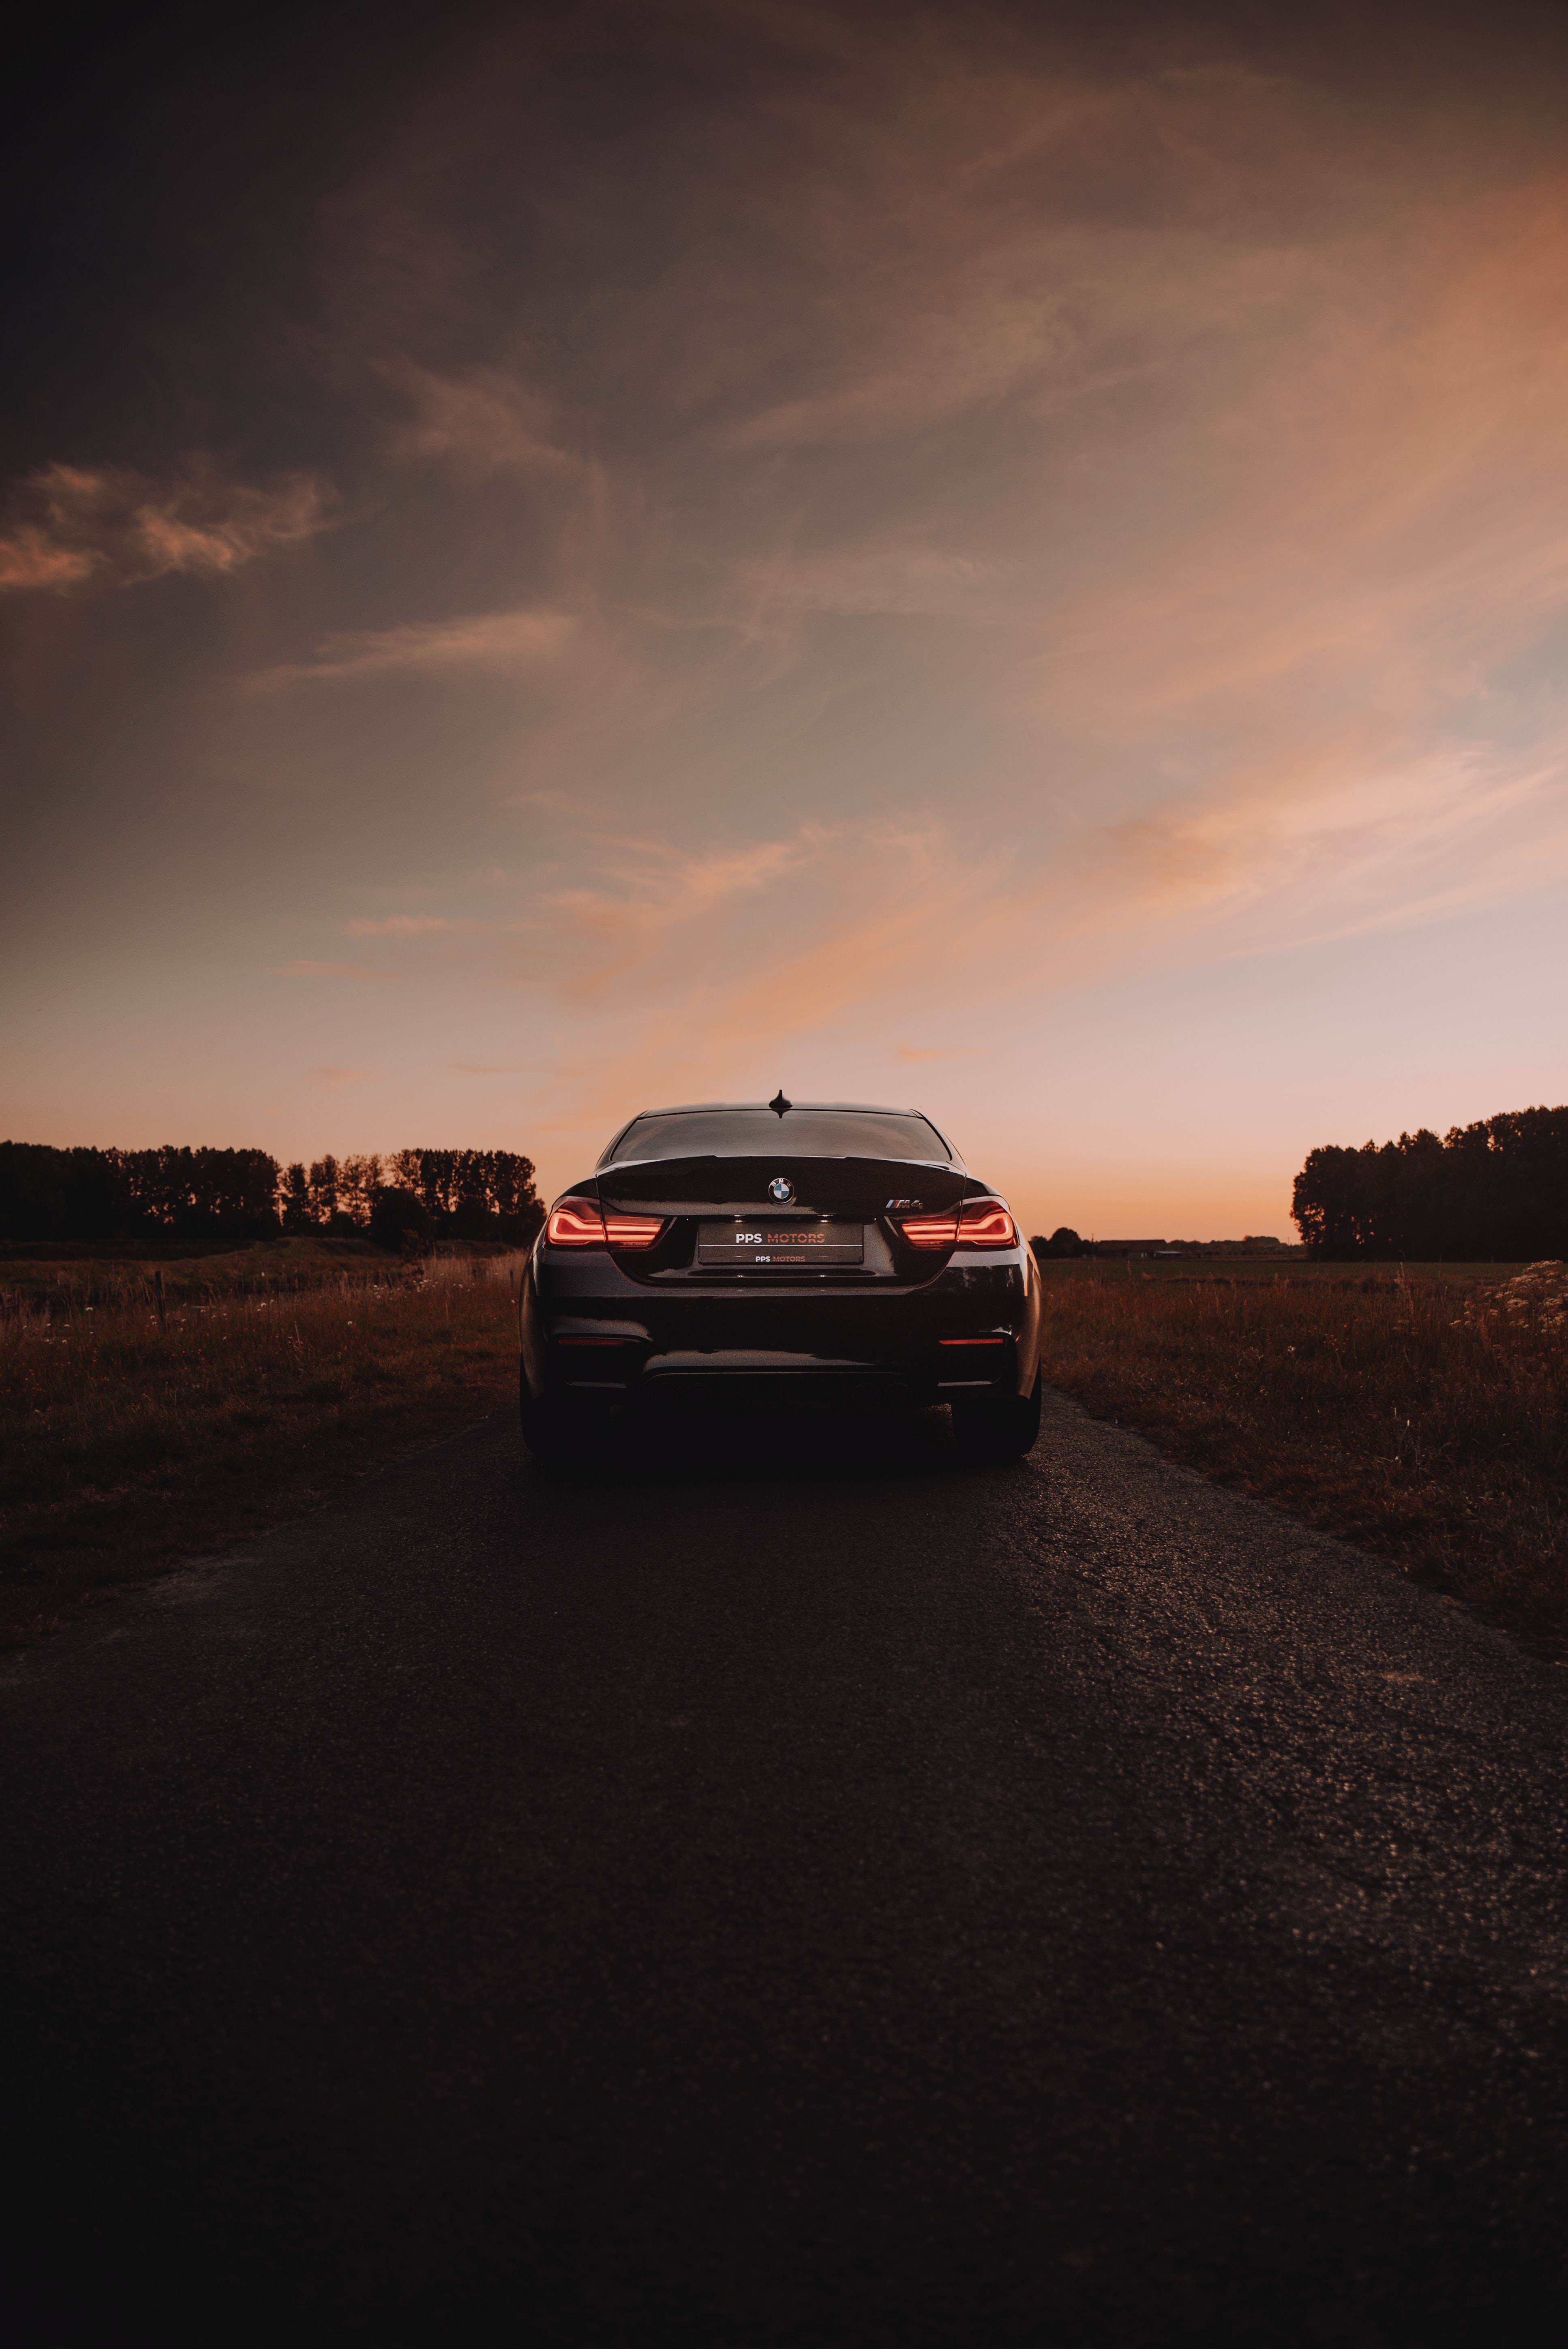 android bmw, bmw m4, sports car, cars, sports, lights, car, back view, rear view, headlights